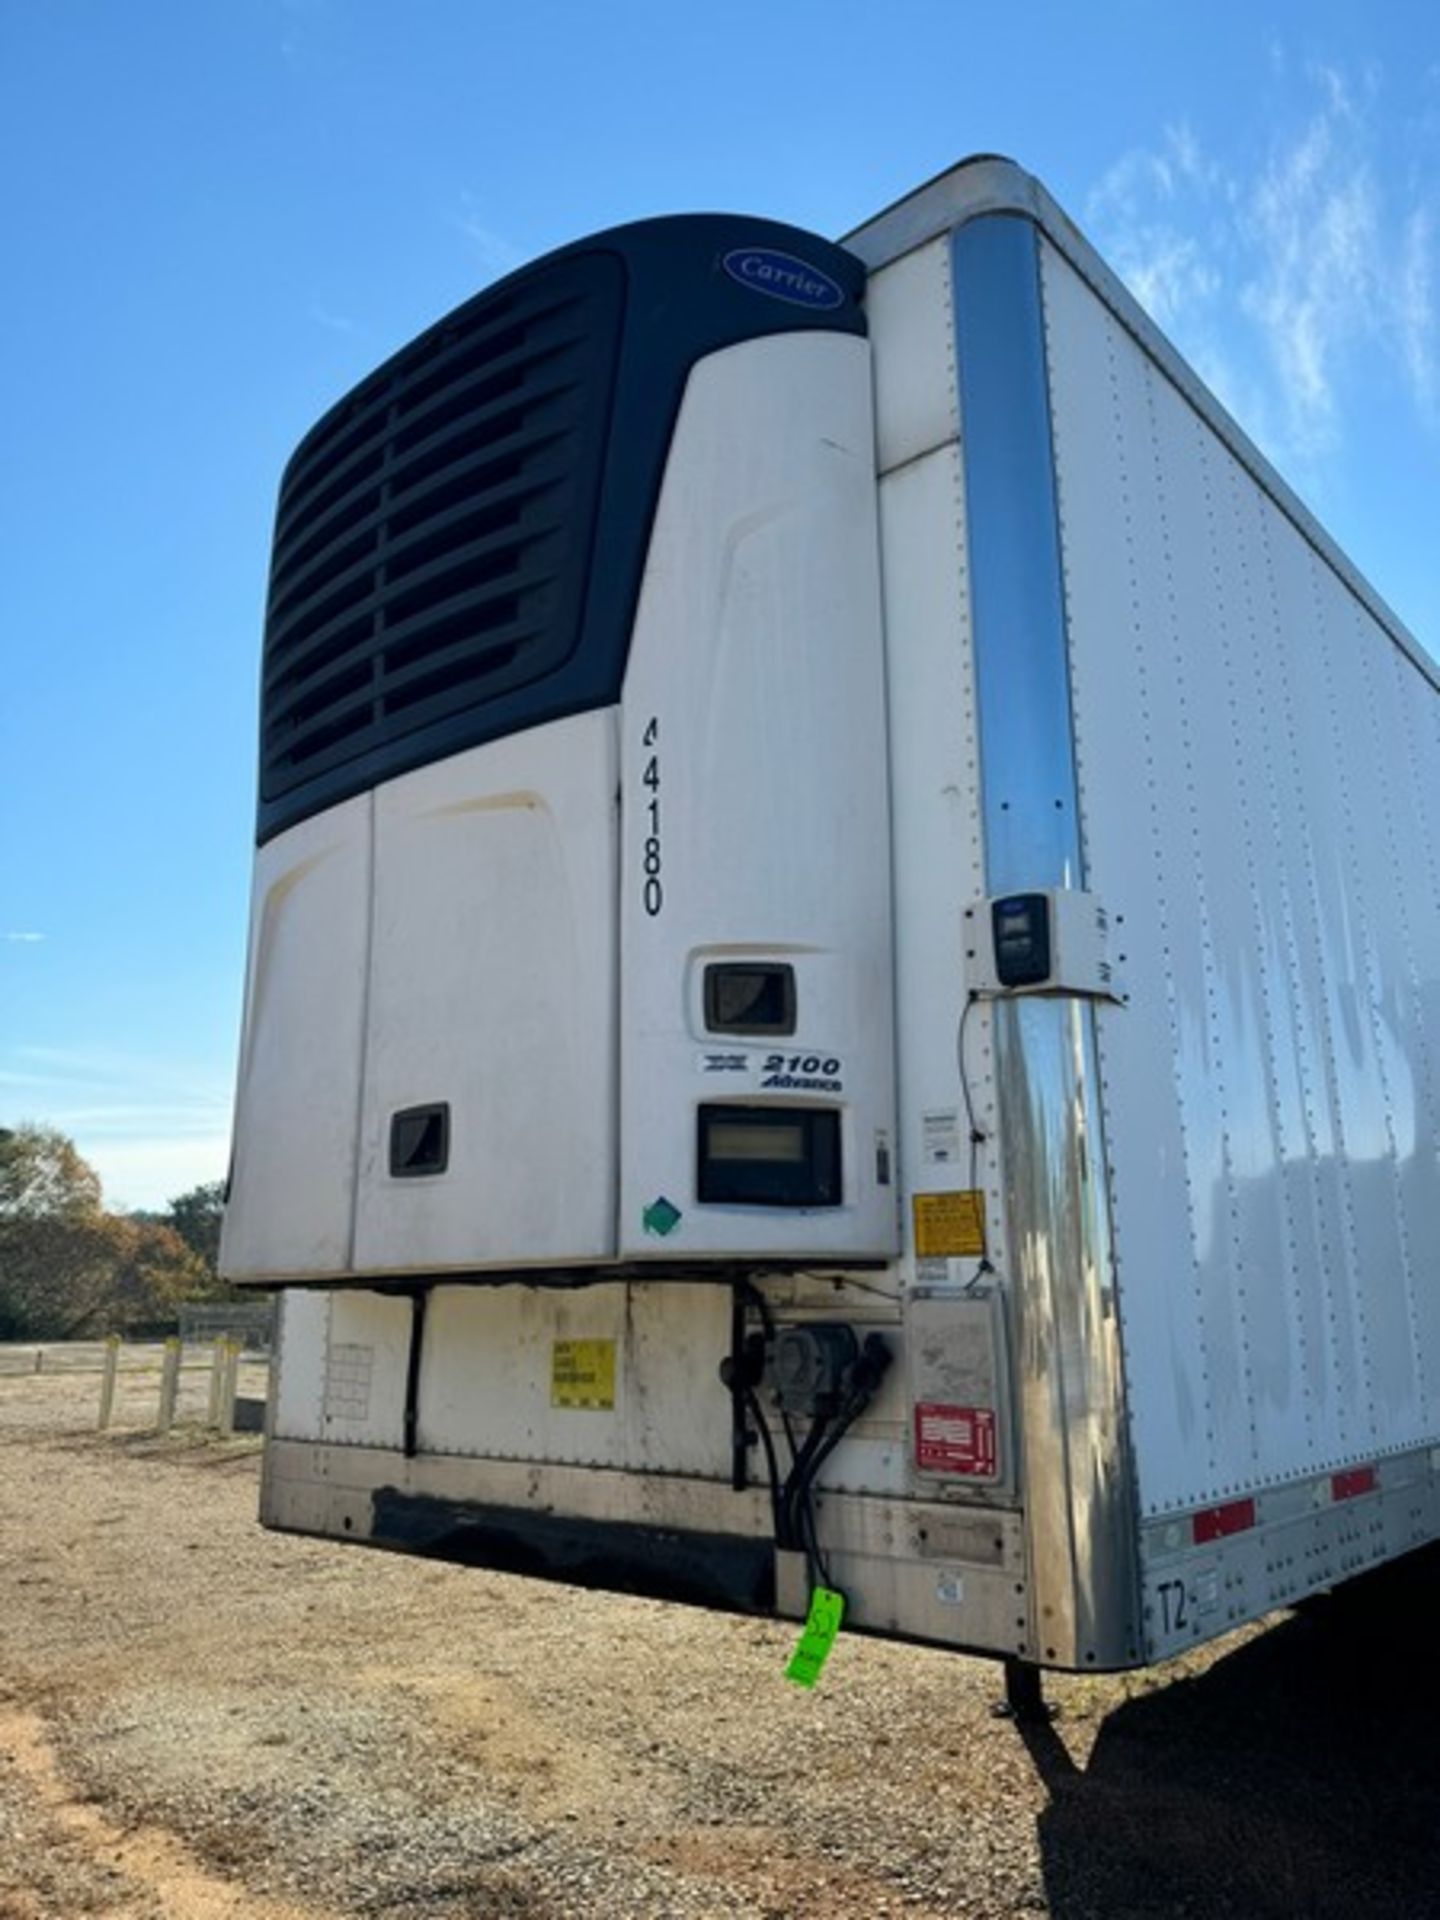 2012 UTILITY Trailer, VIN# IUY VS2536 DM4917 23 VS2RA, with Carrier Refrigeration Unit - Image 9 of 13